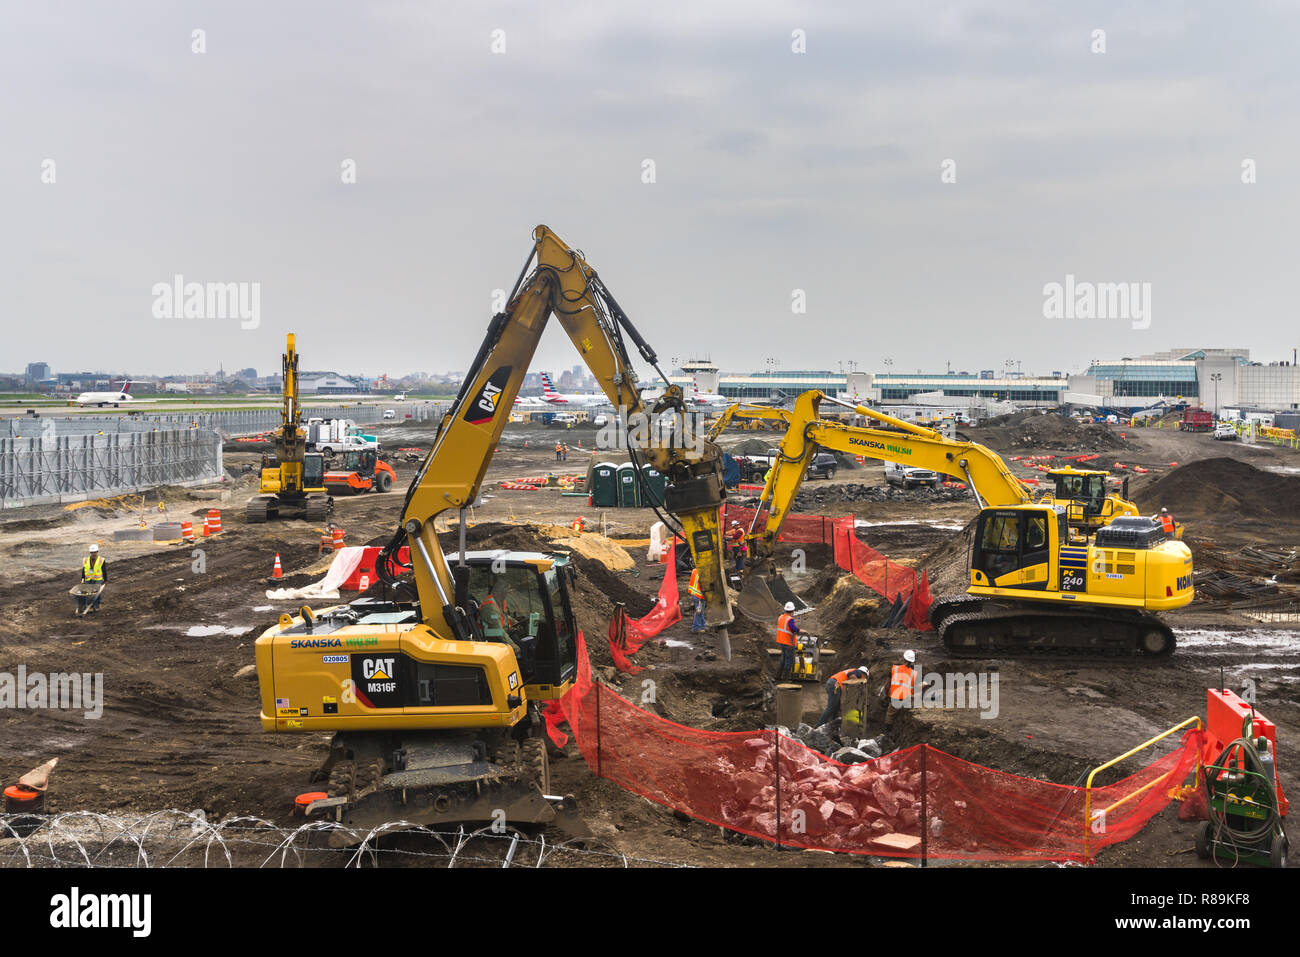 Construction equipment and workers building the new terminal at La Guardia airport in Queens, New York, USA Stock Photo